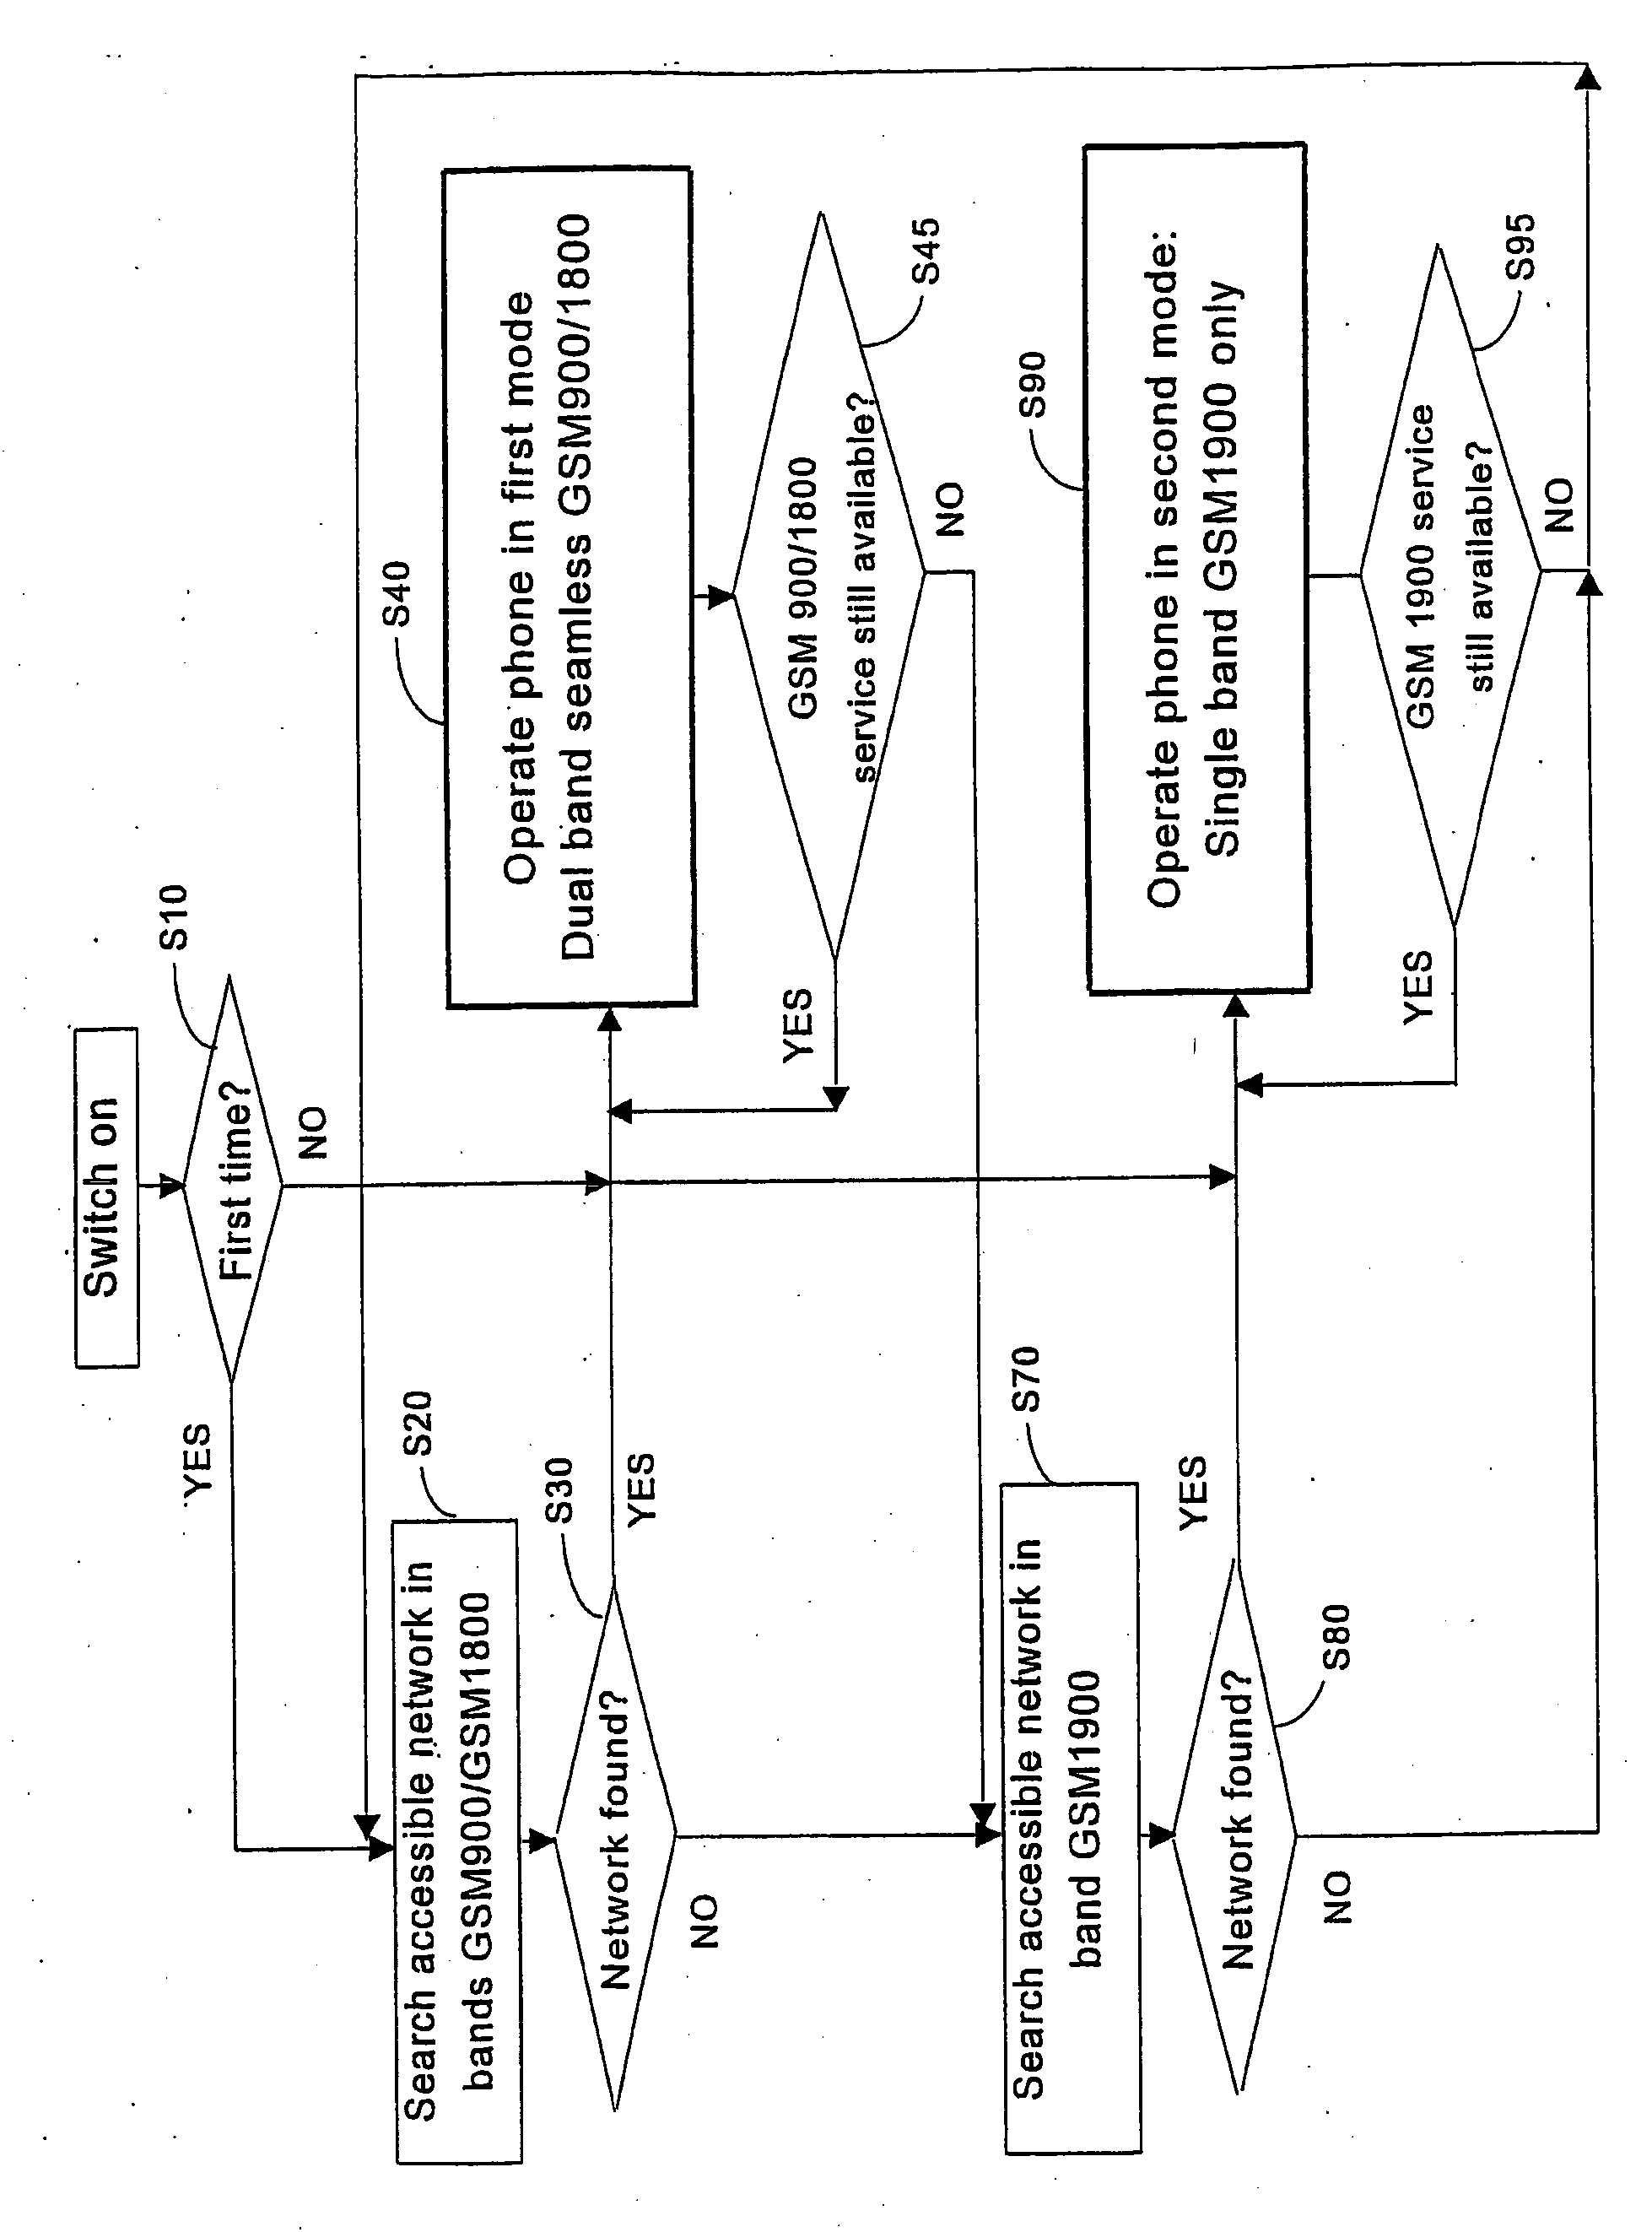 Method for controlling a wireless multi-band and/or multi-wave wireless telecommunications device